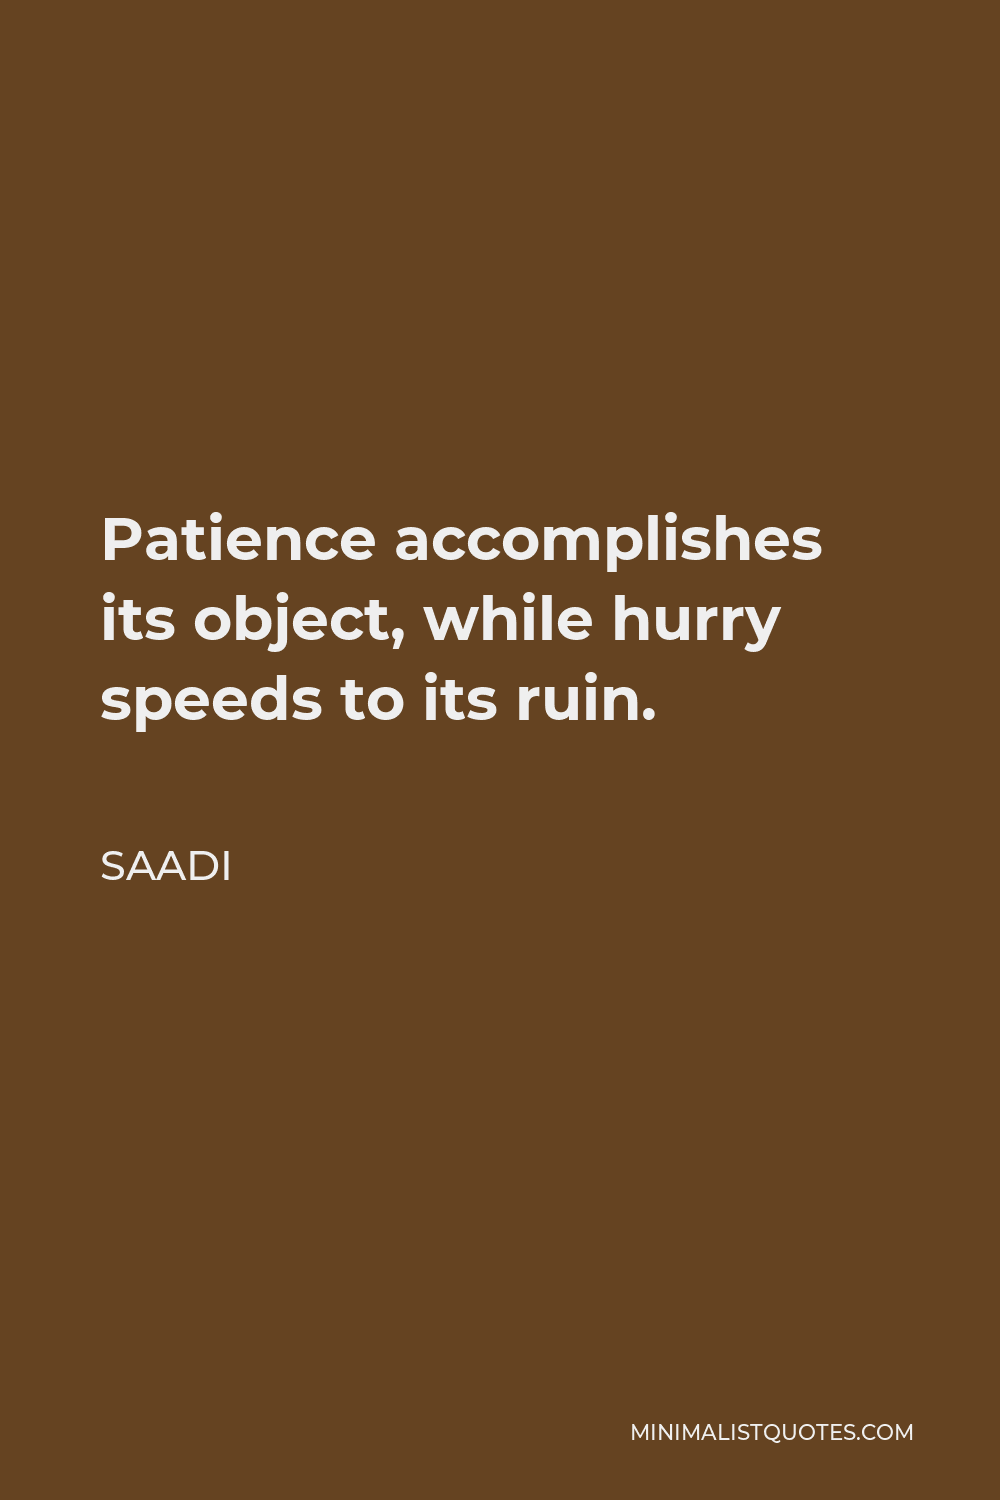 Saadi Quote - Patience accomplishes its object, while hurry speeds to its ruin.